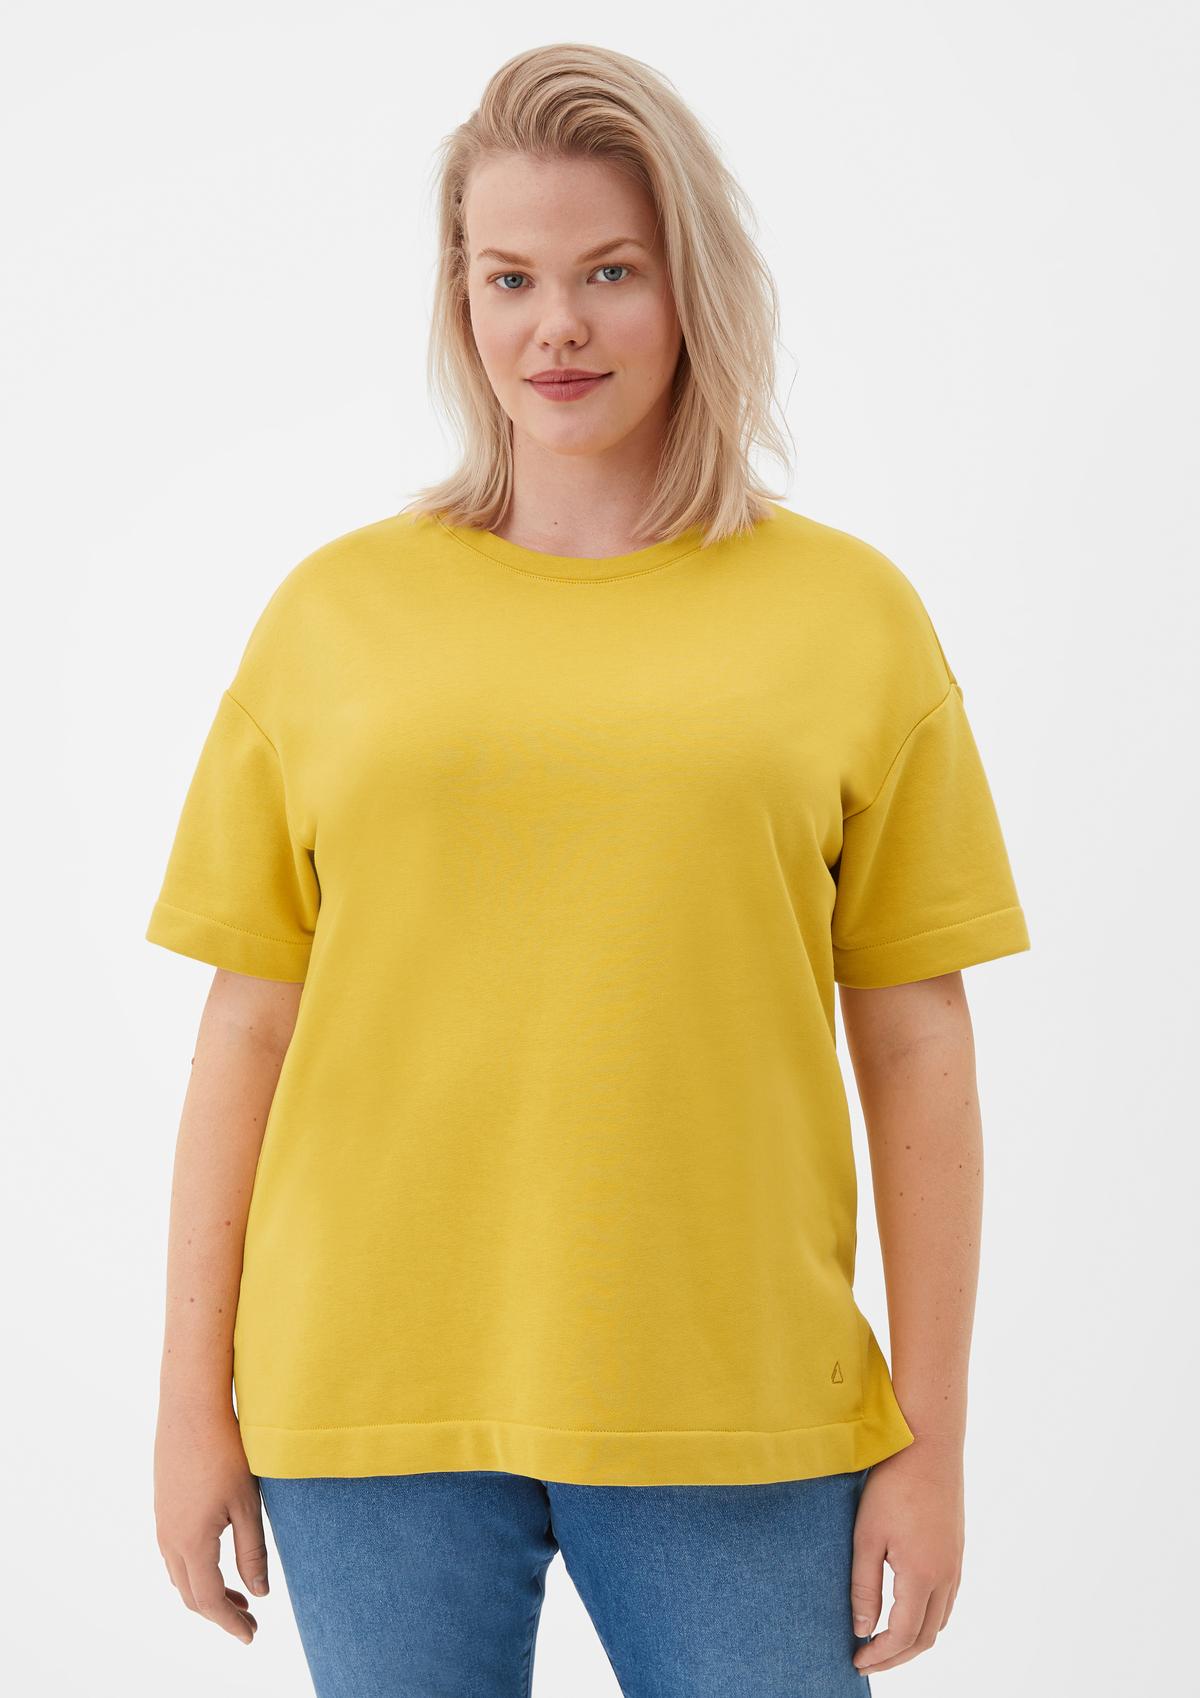 s.Oliver Sweatshirt with short sleeves